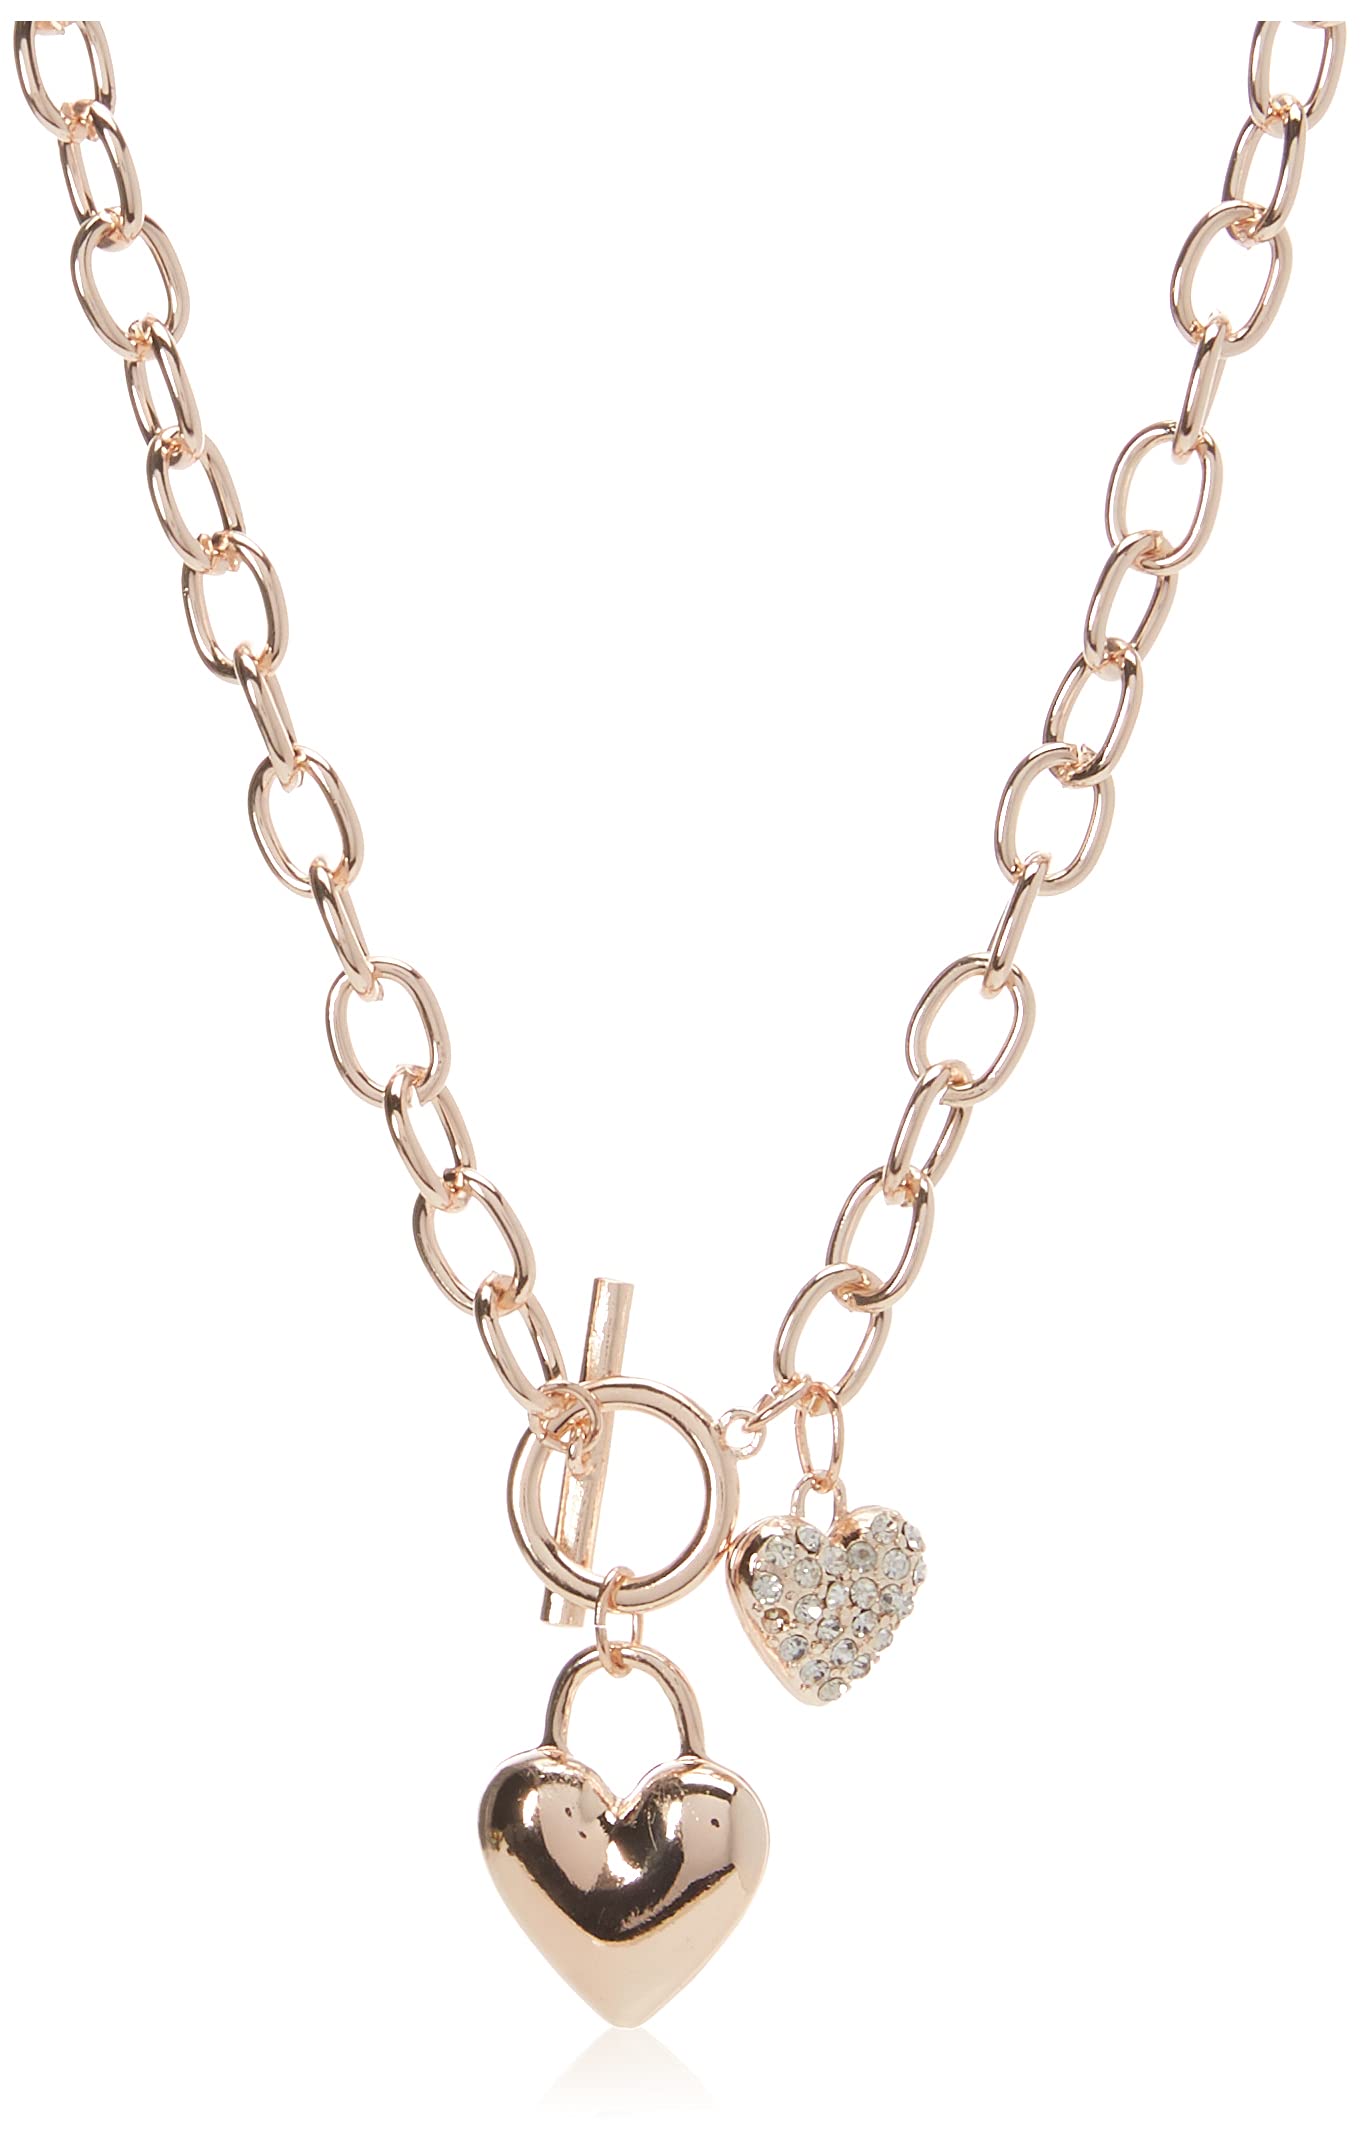 GUESS Rose-Gold-Tone Heart Lock Charm Toggle Chain Necklace